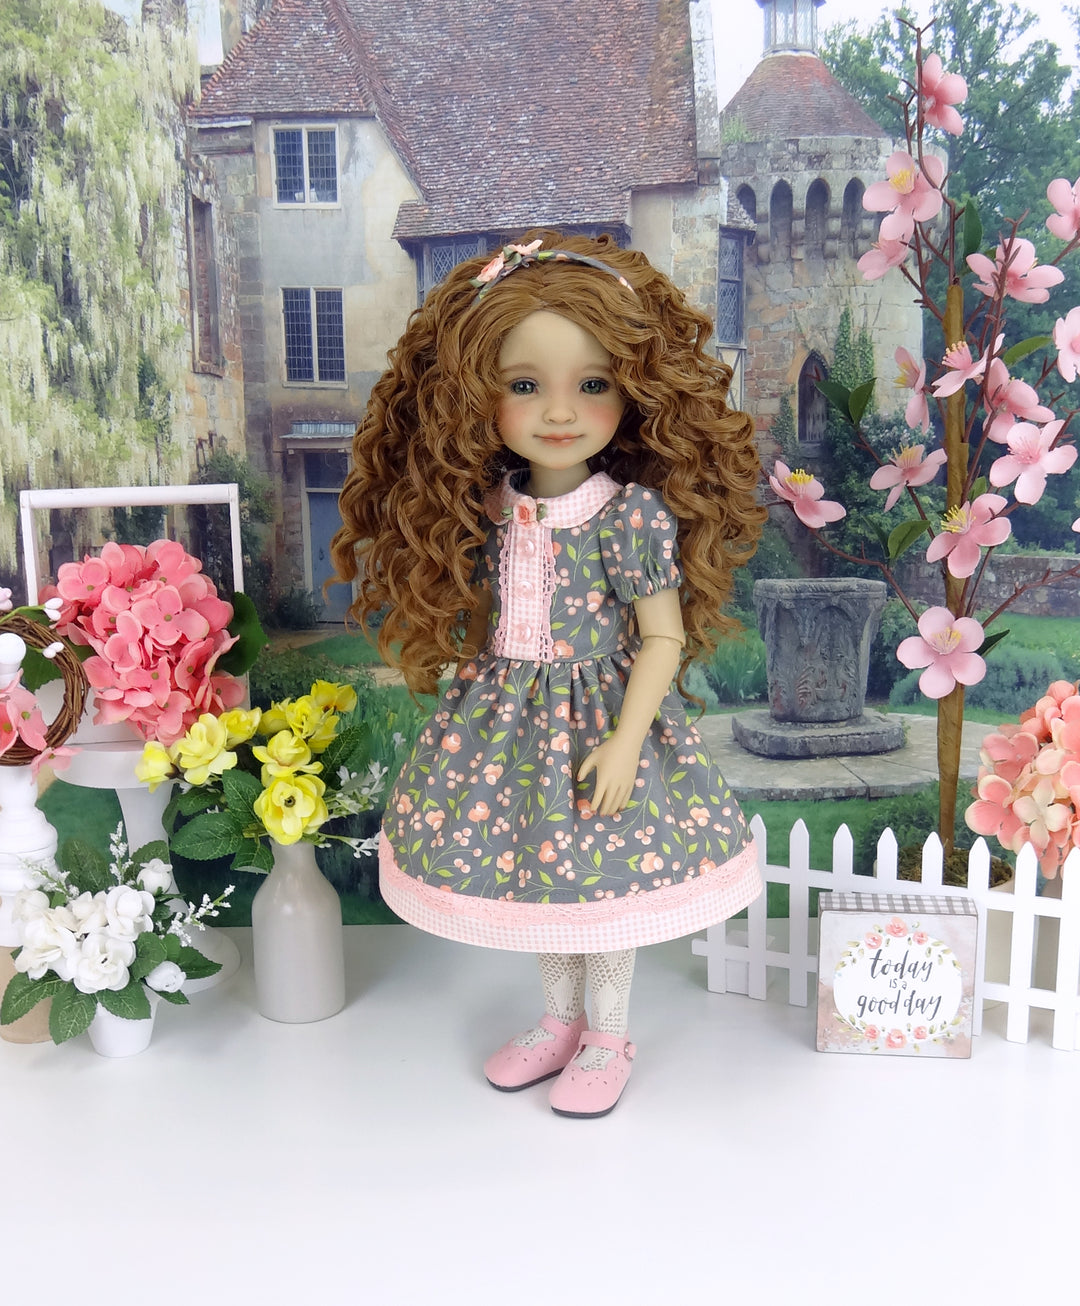 Tomorrow's Flowers - dress ensemble with shoes for Ruby Red Fashion Friends doll